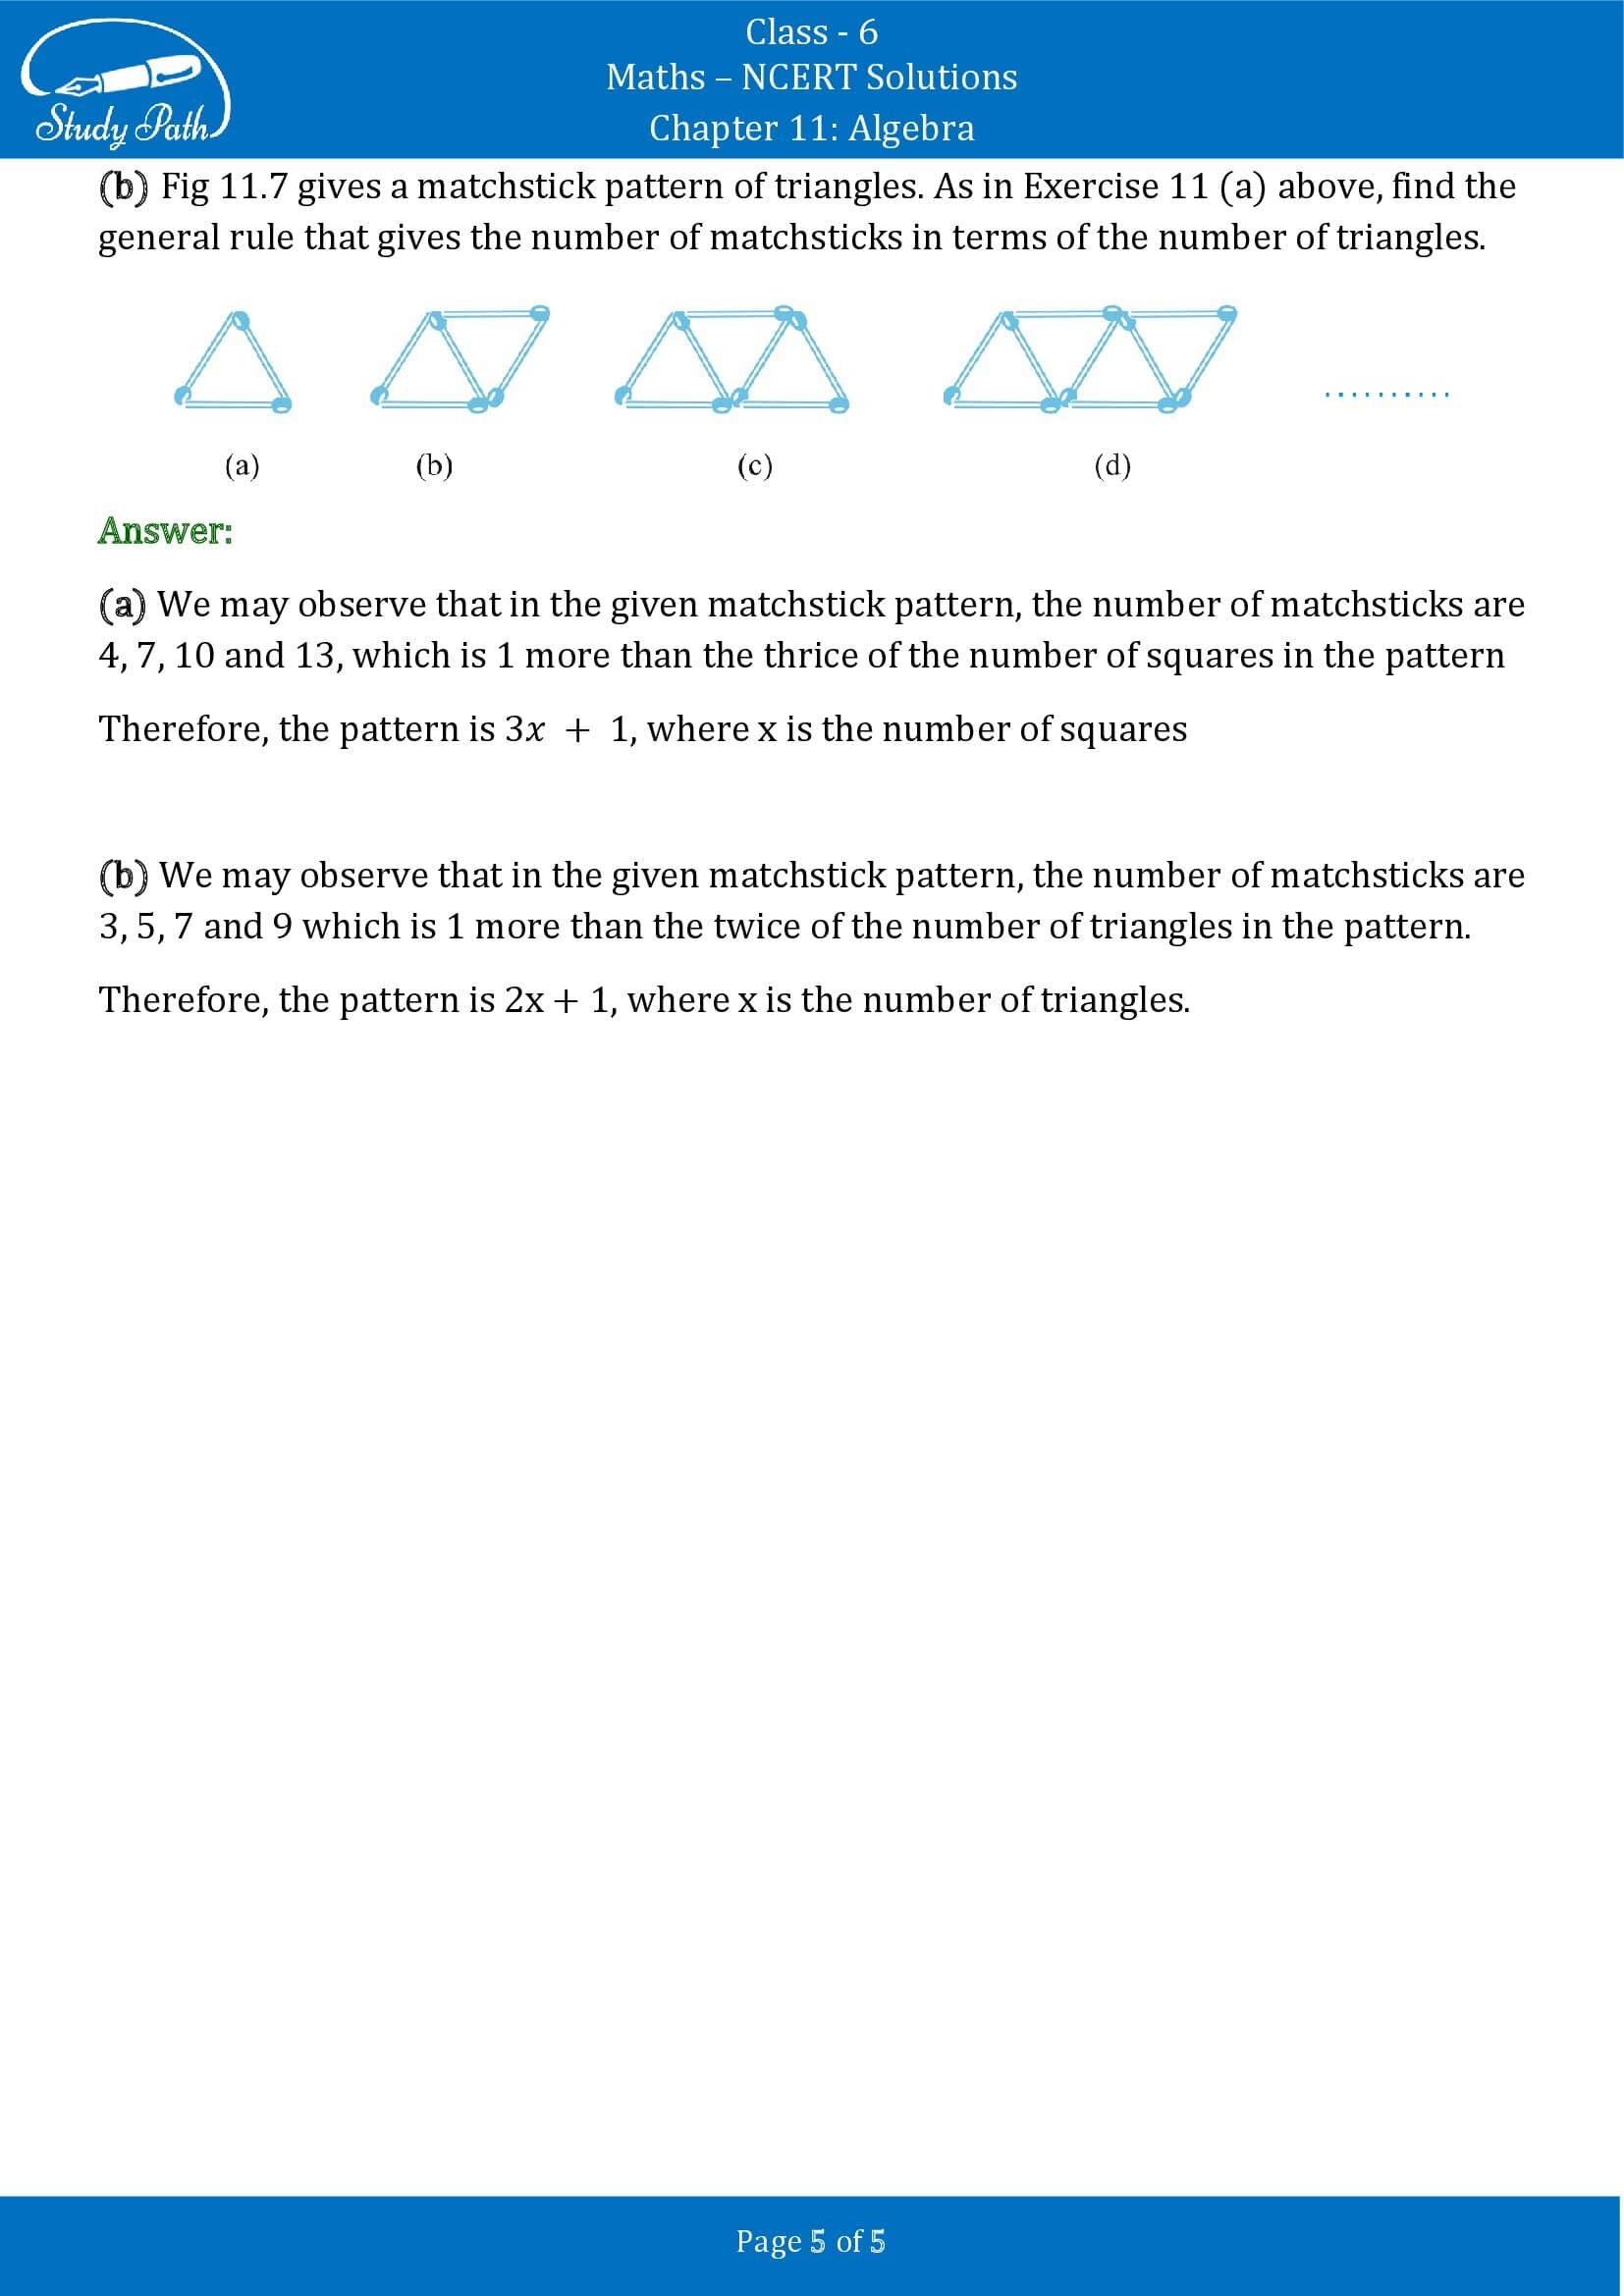 NCERT Solutions for Class 6 Maths Chapter 11 Algebra Exercise 11.1 00005